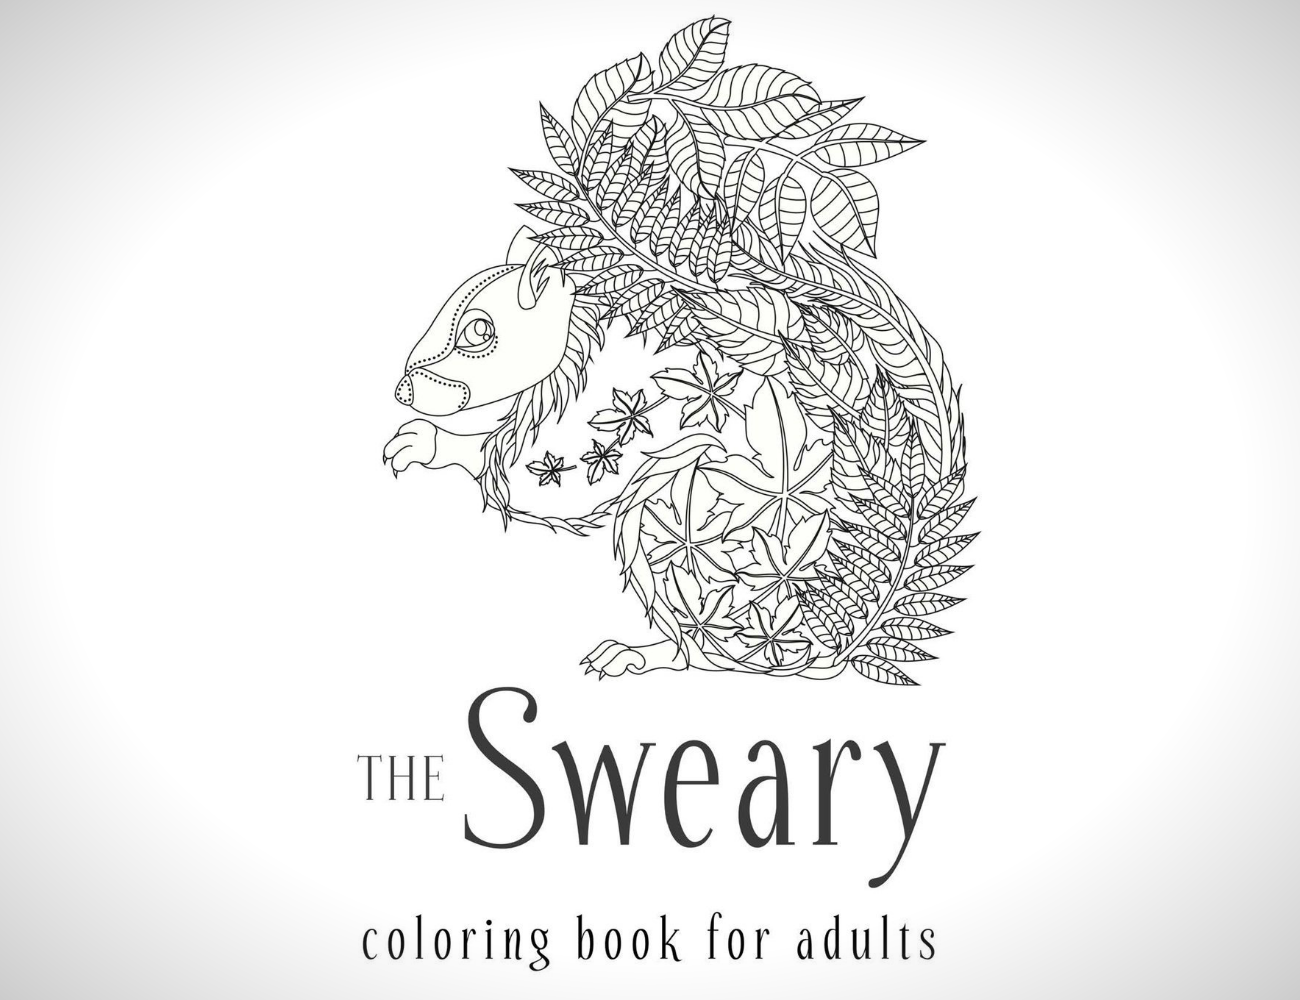 Image of Sweary, an Adult Coloring Book